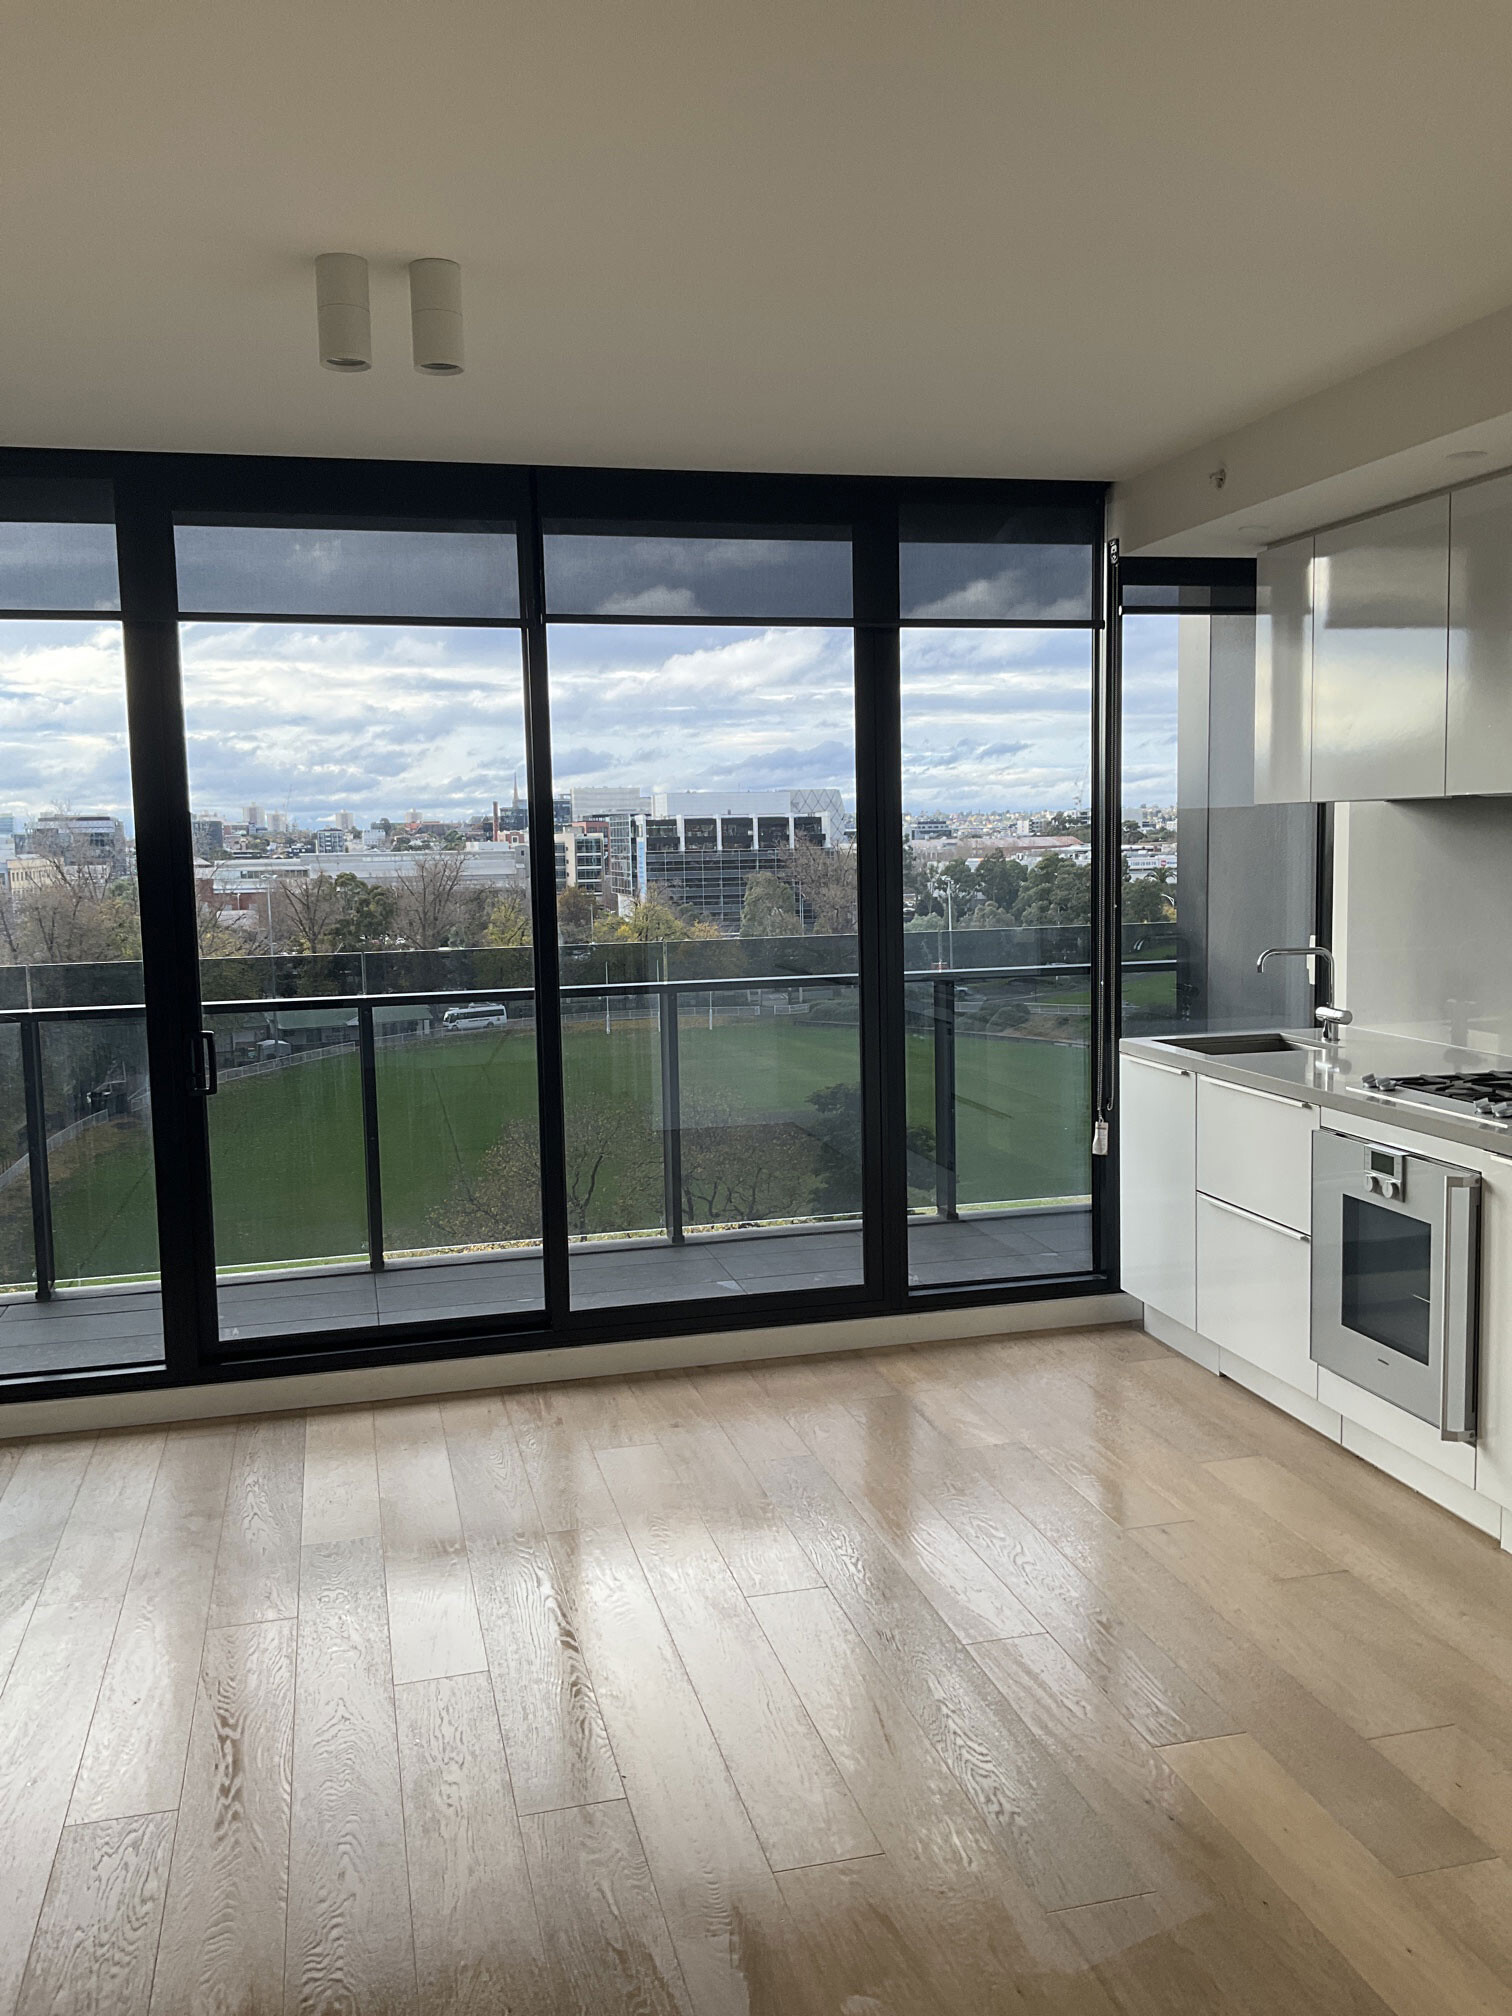 empty apartment overlooking a park